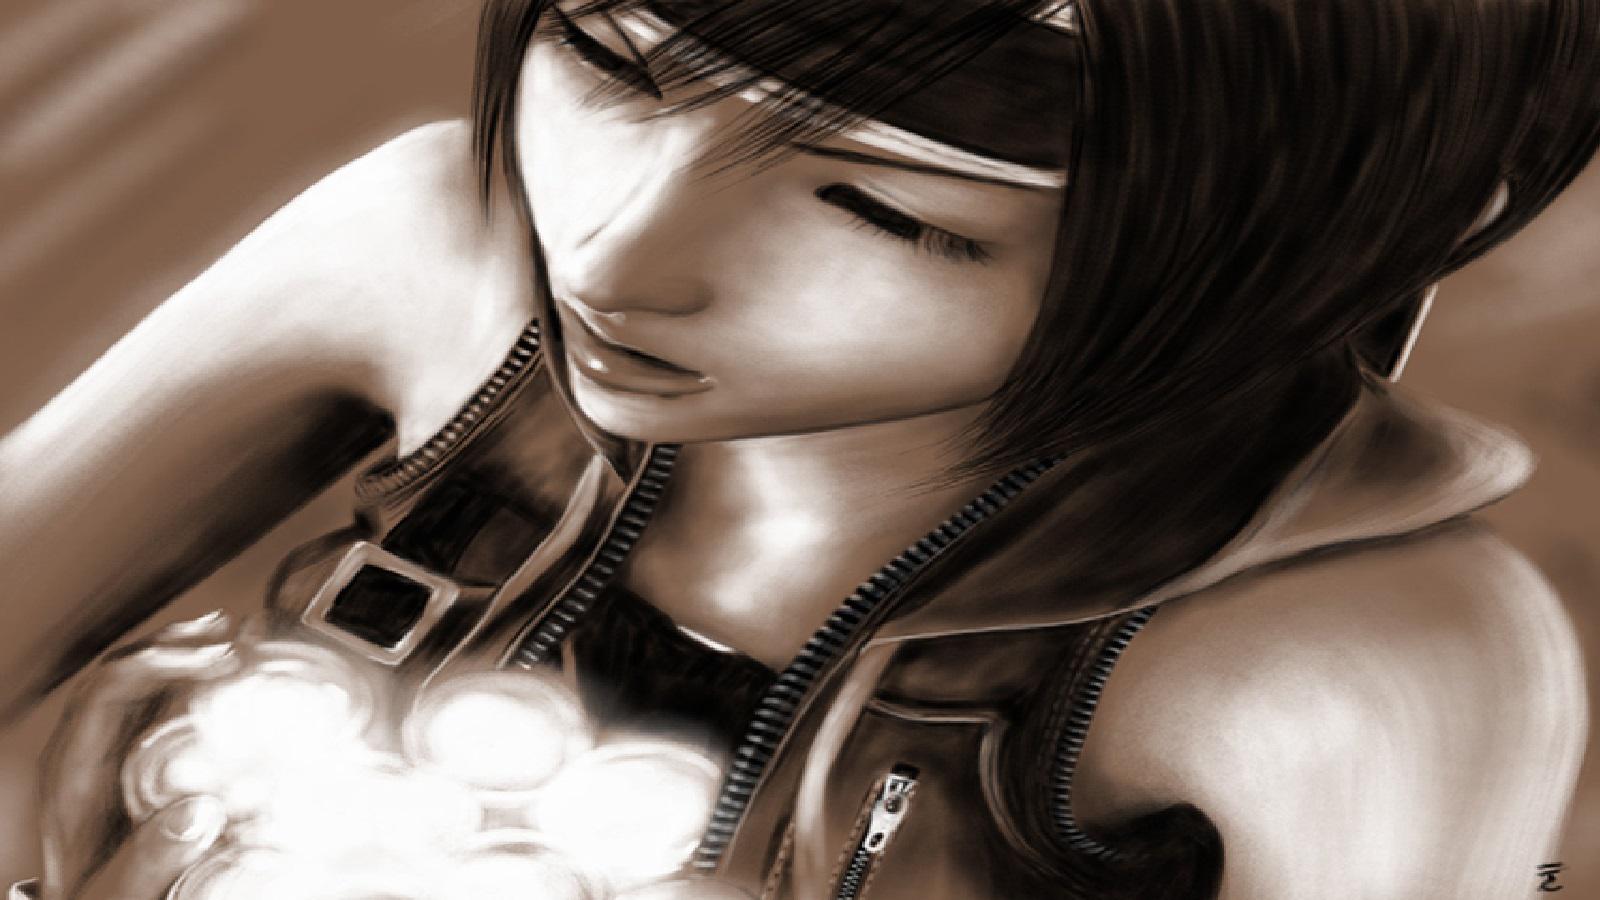 Ff7 ac yuffie - (#153369) - High Quality and Resolution Wallpapers ...